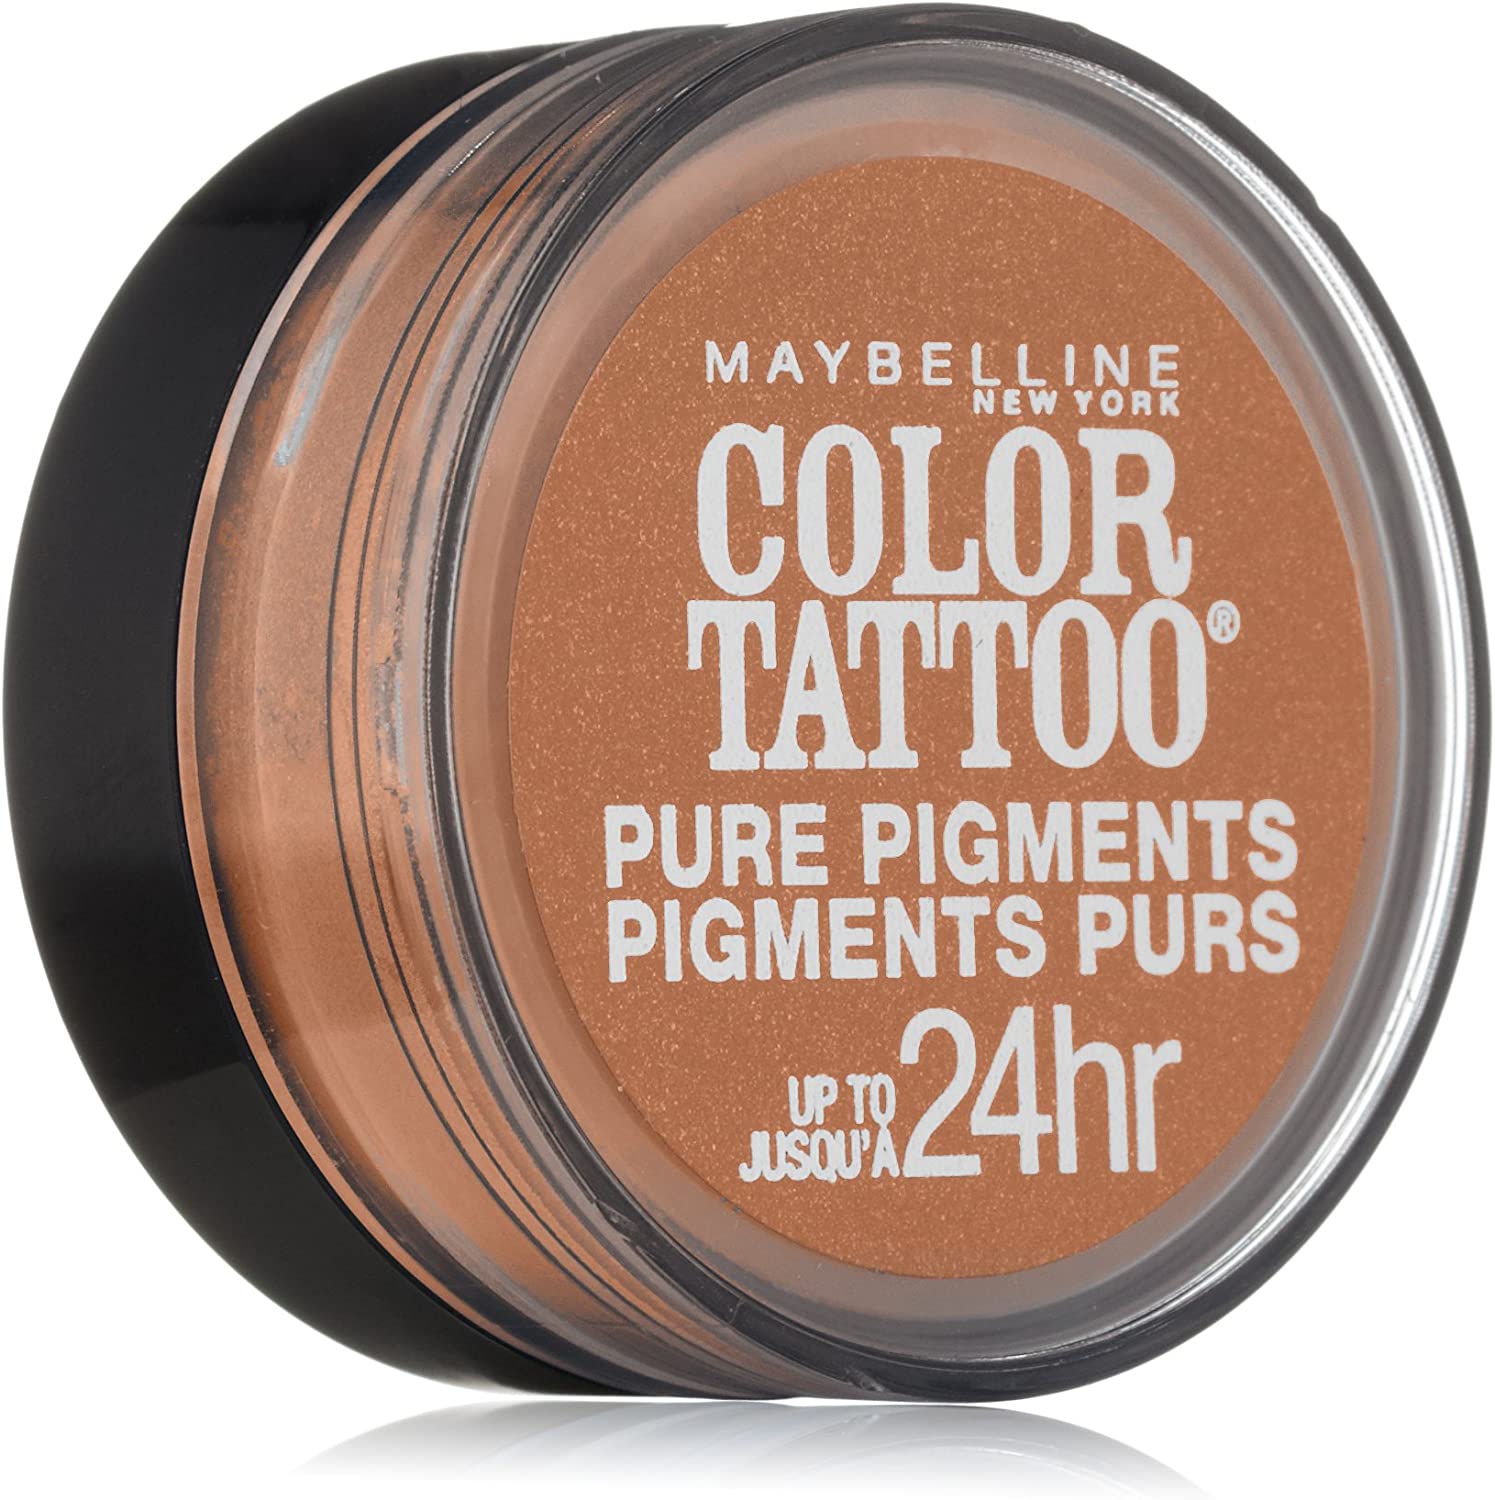 Maybelline Color TATTOO Pure Pigments Eyeshadow